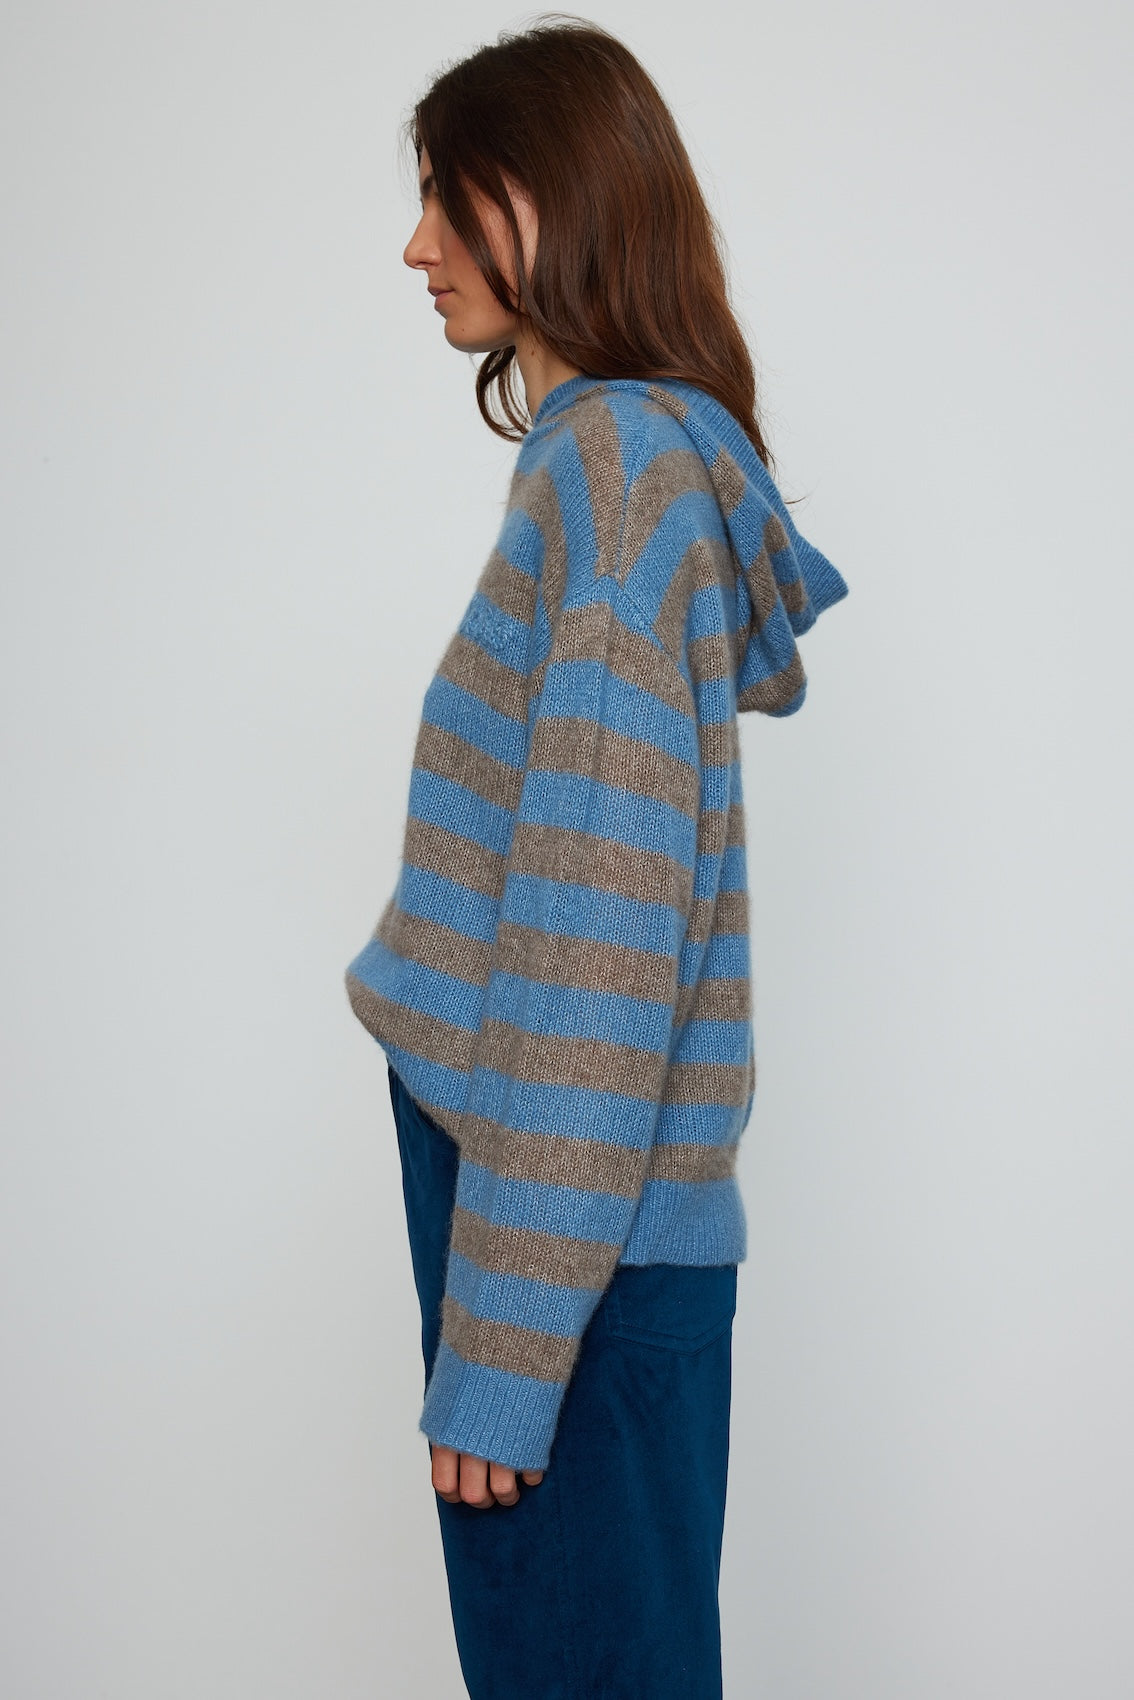 Caro Editions Ultra-soft, light-weight, oversized hoodie made from cashmere silk yarn. A versatile piece, that can easily be used for layering. Material: 75% Cashmere, 25% Silk.